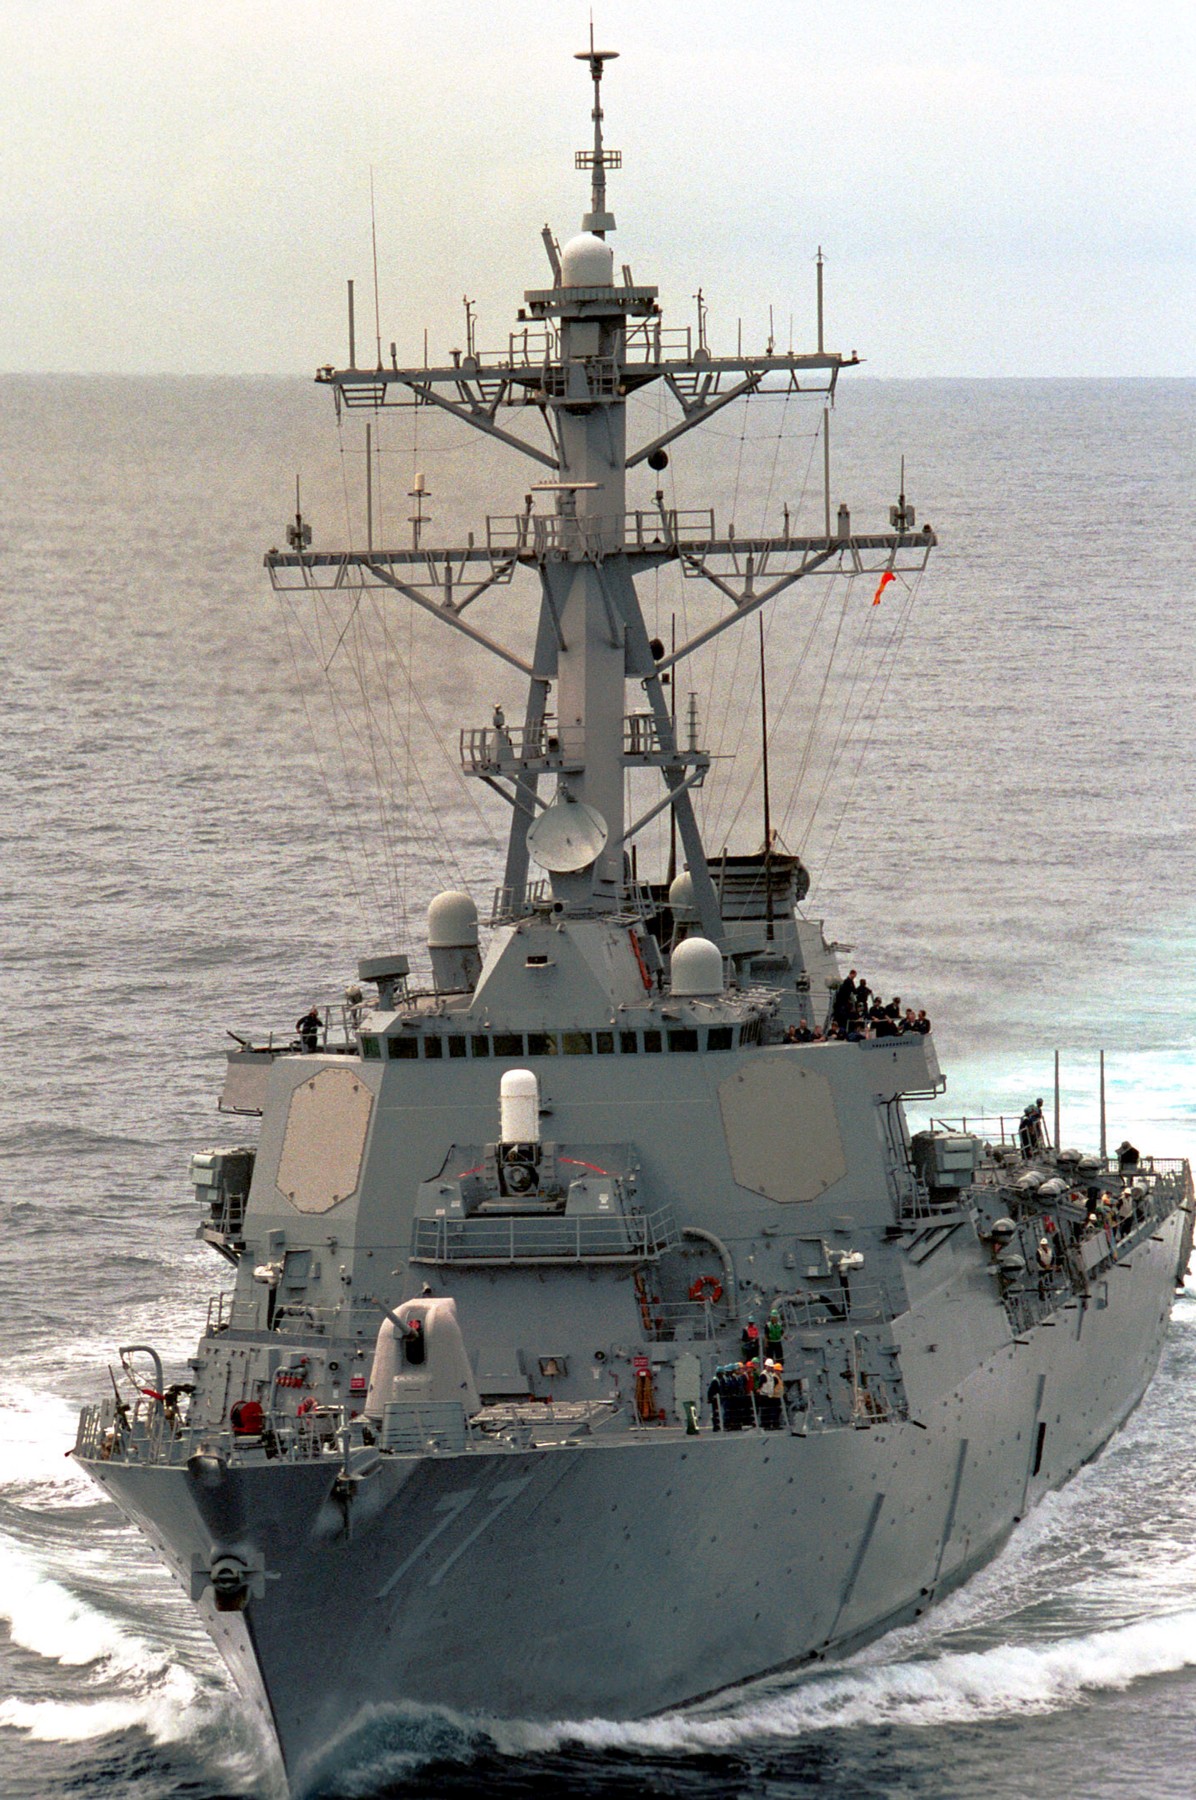 ddg-77 uss o'kane guided missile destroyer arleigh burke class navy aegis 66 operation enduring freedom